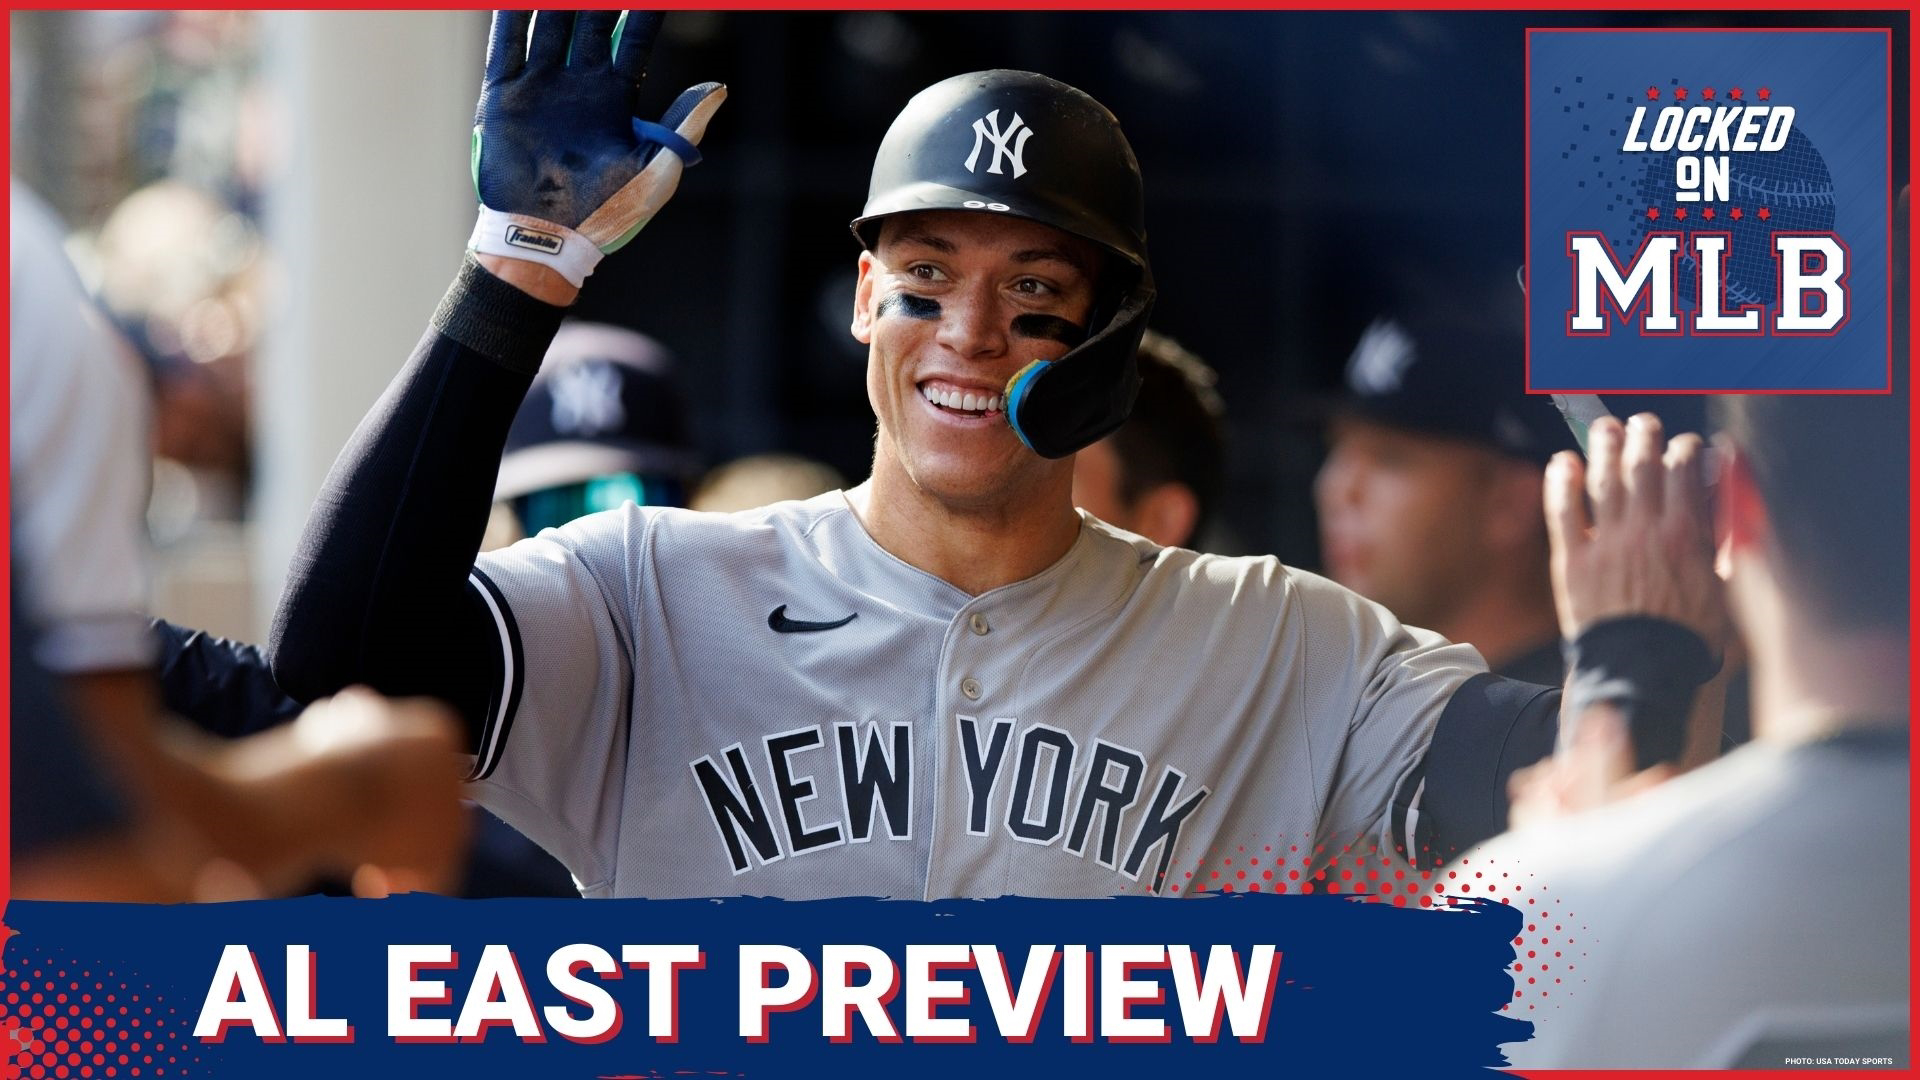 A special edition of Lock On MLB previewing the AL East division for the upcoming 2023 season. The teams to watch and who could win it all.